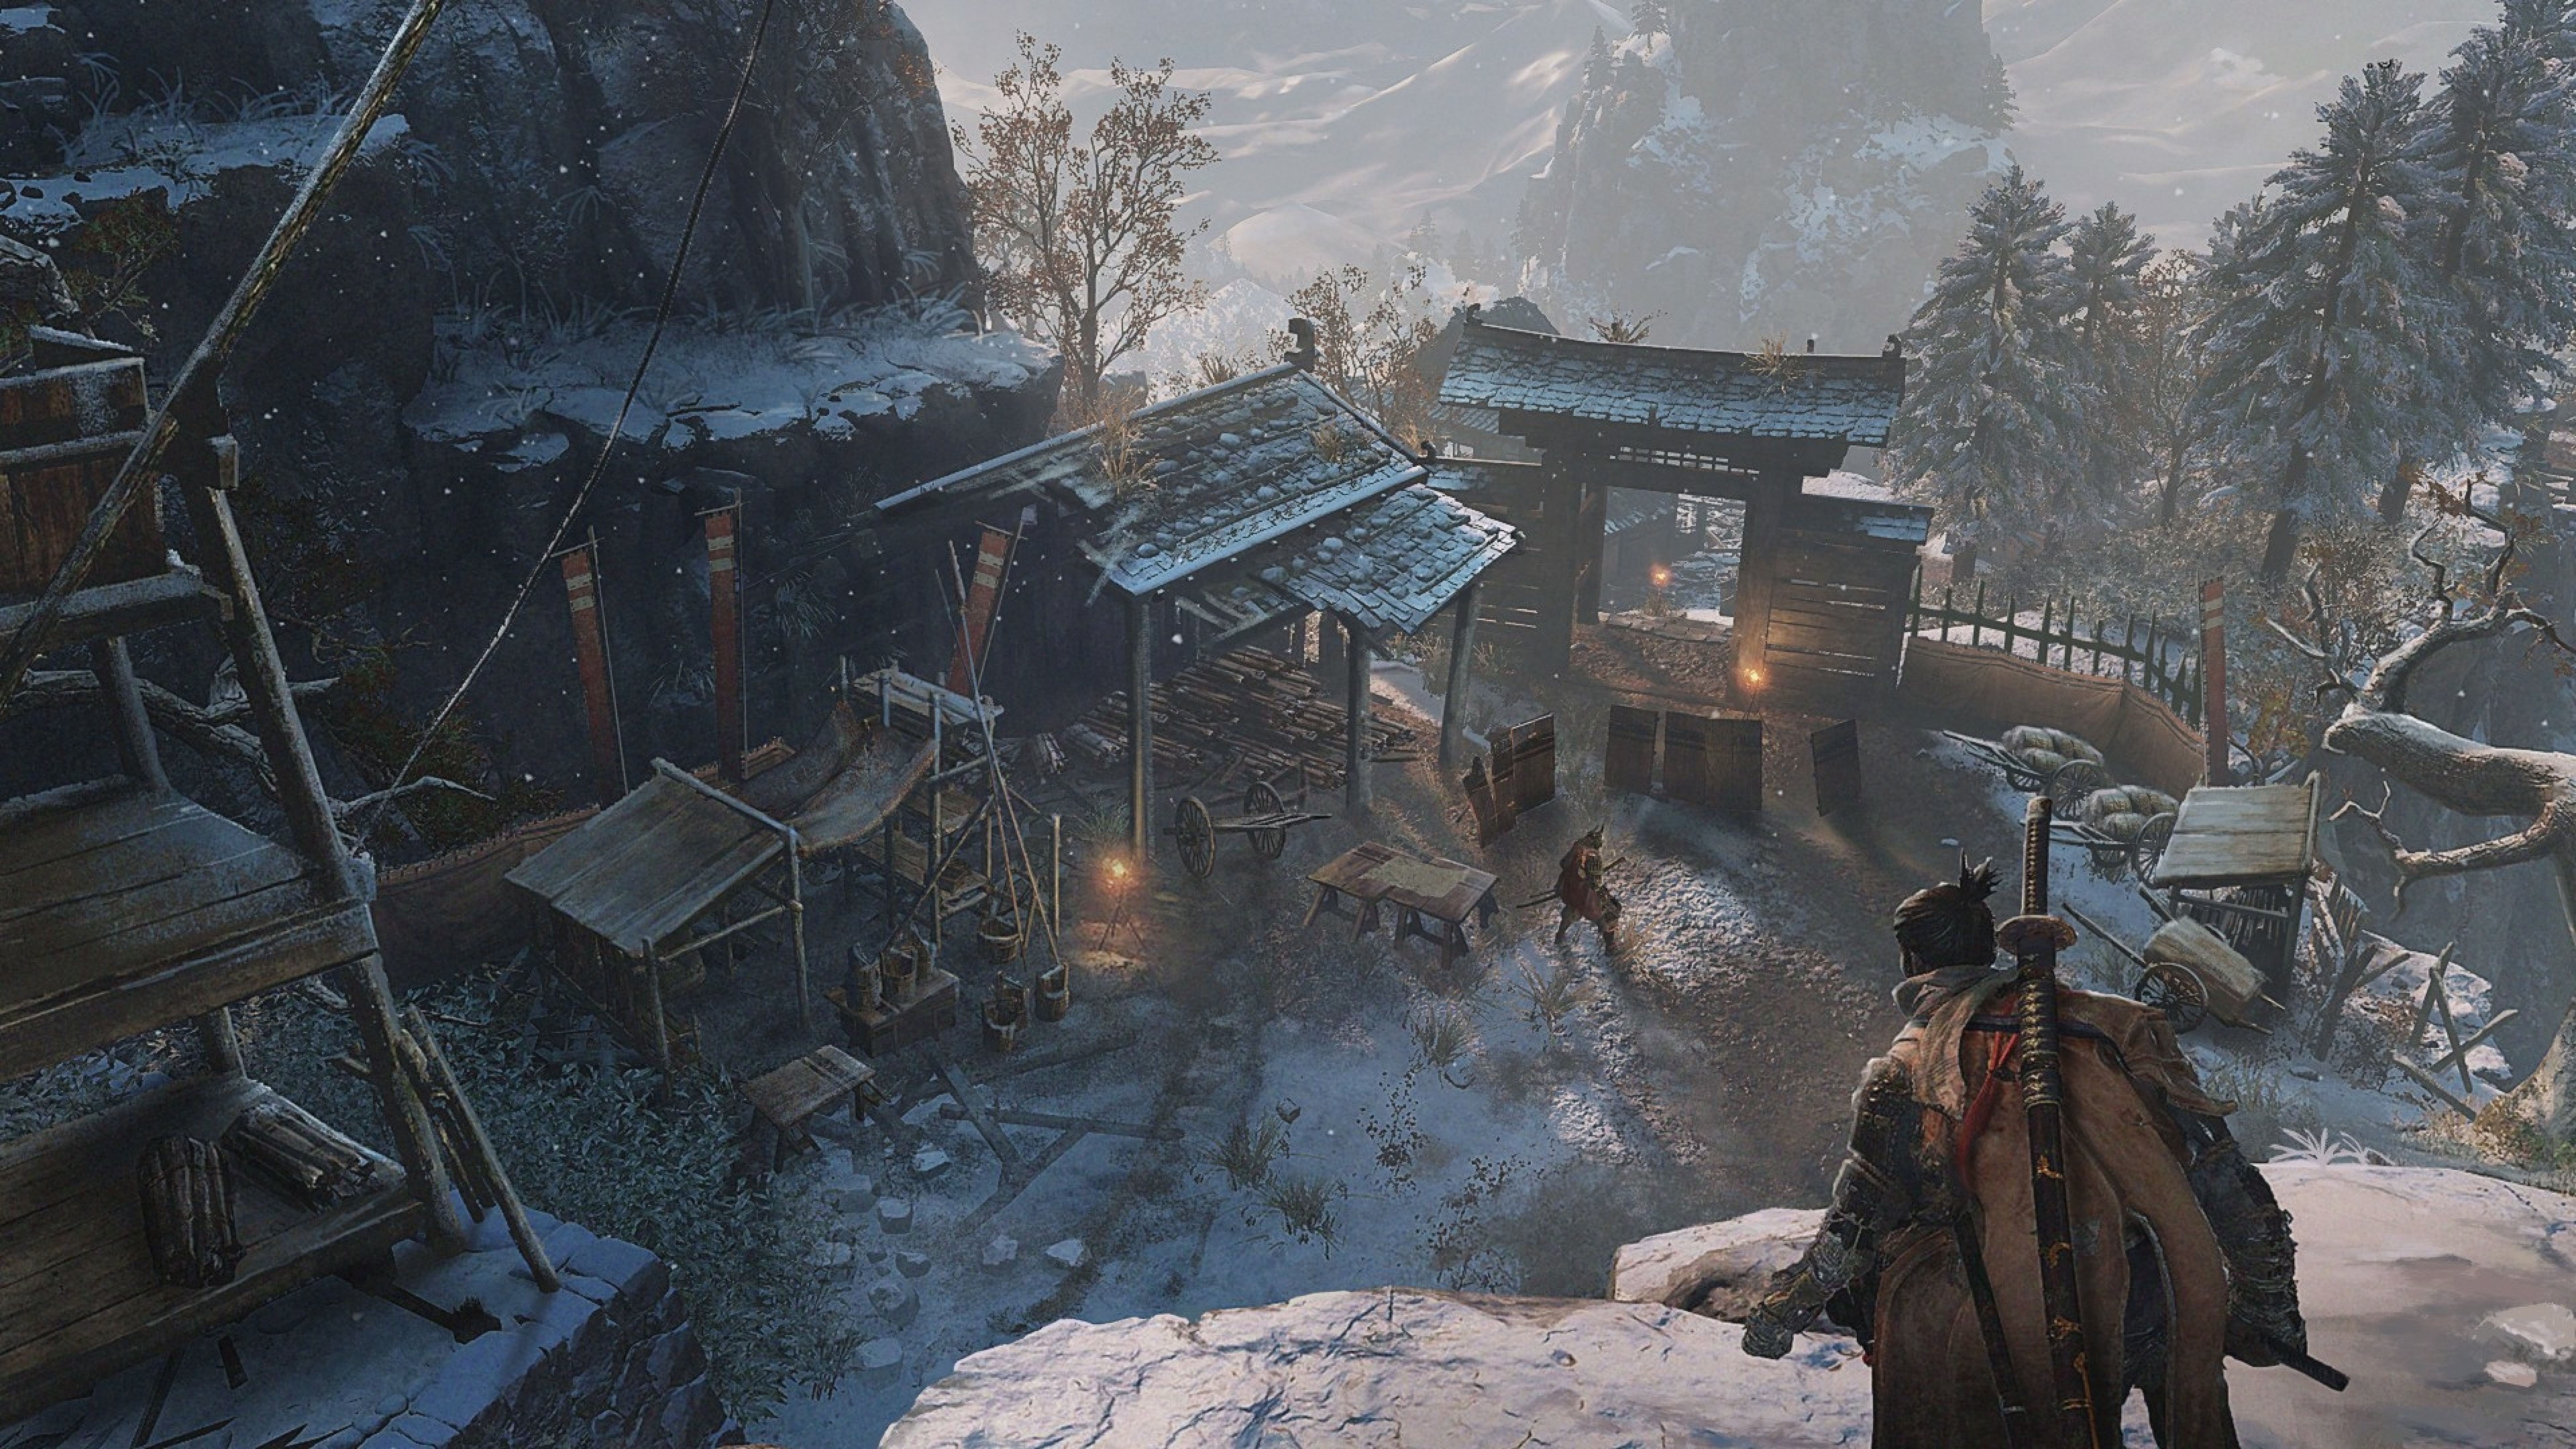 download sekiro ™ shadows die twice for free